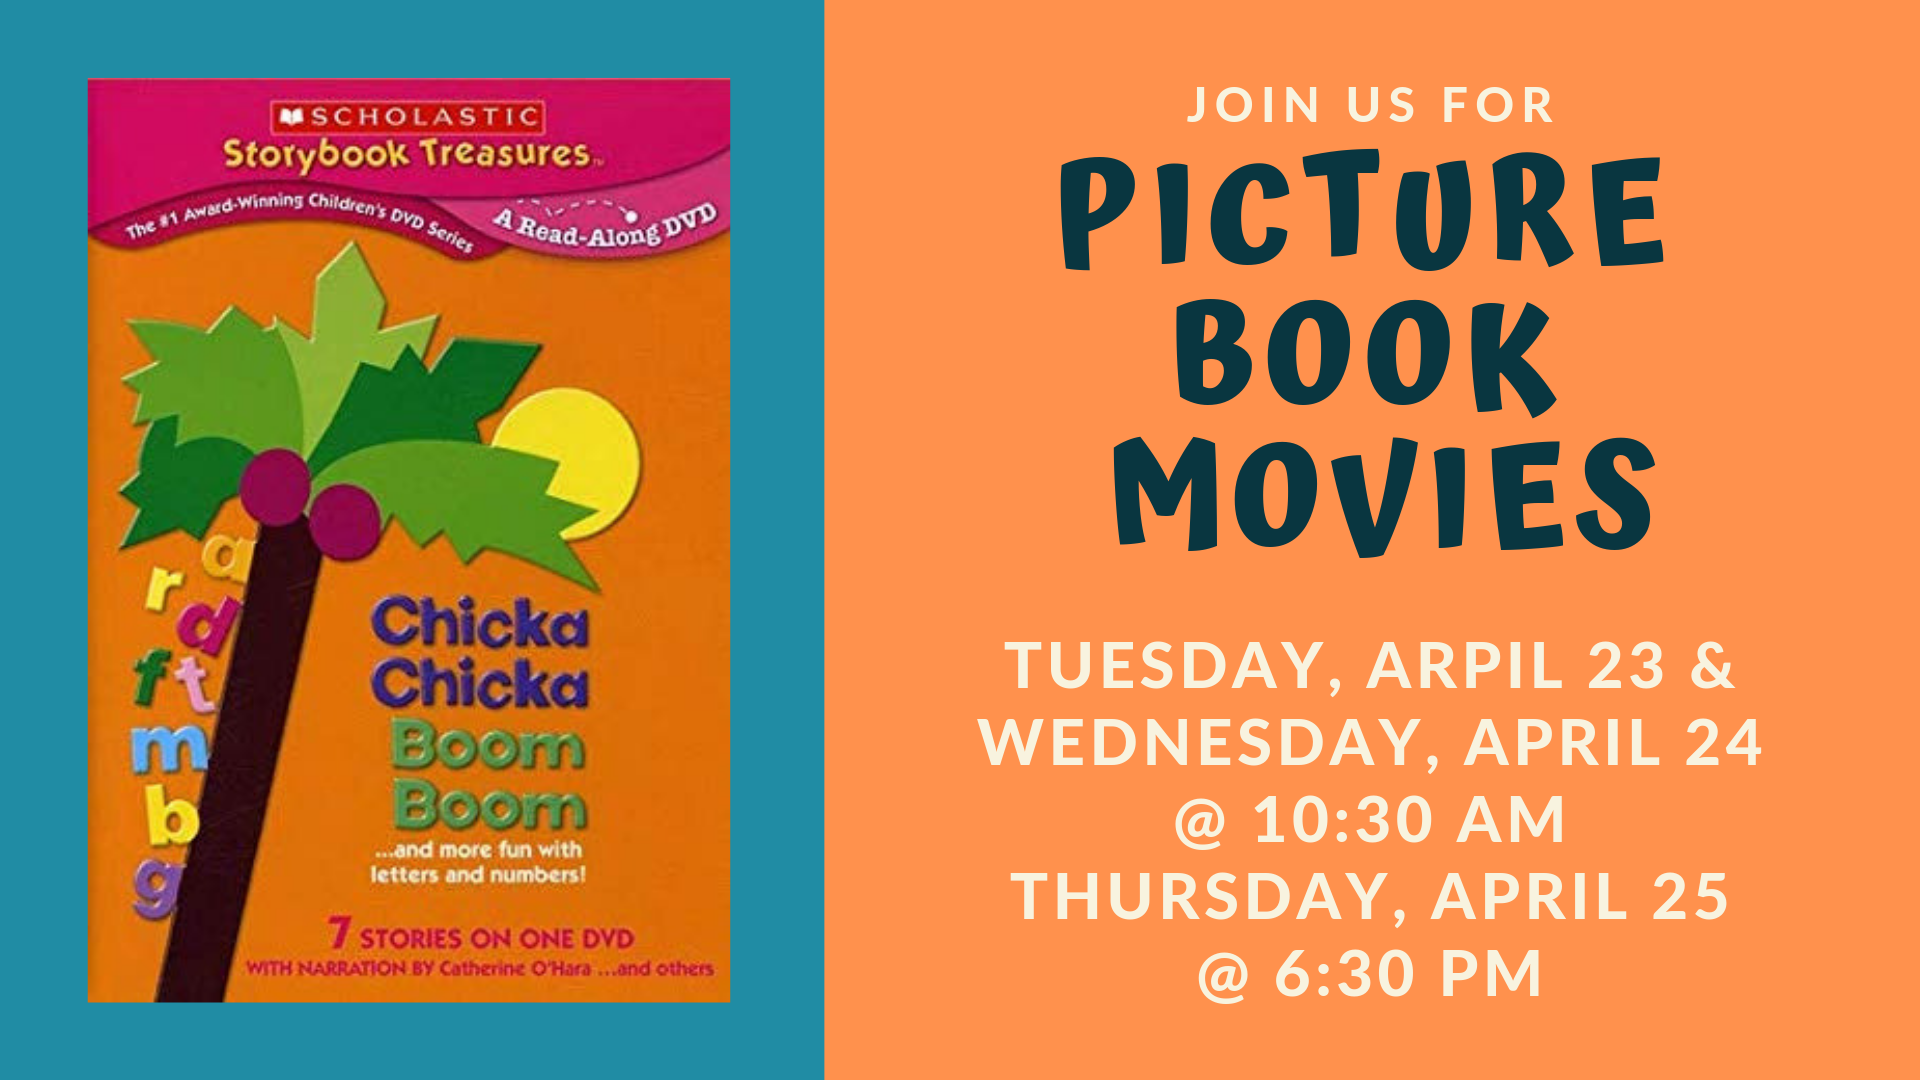 Picture Book Movies flyer with the DVD cover of the Chicka Chicka Boom Boom book on the front.